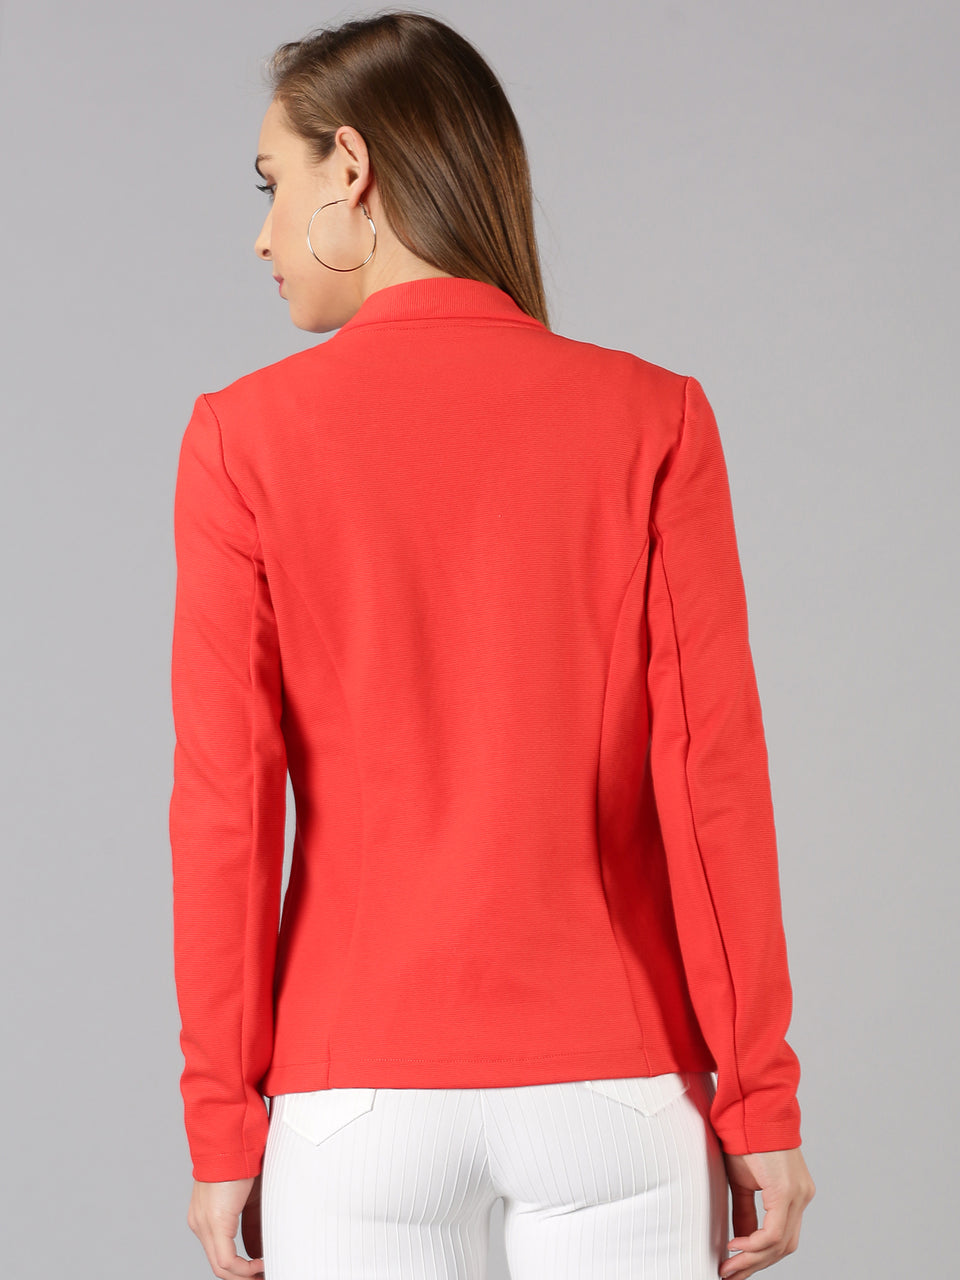 red full sleeve solid women jacket